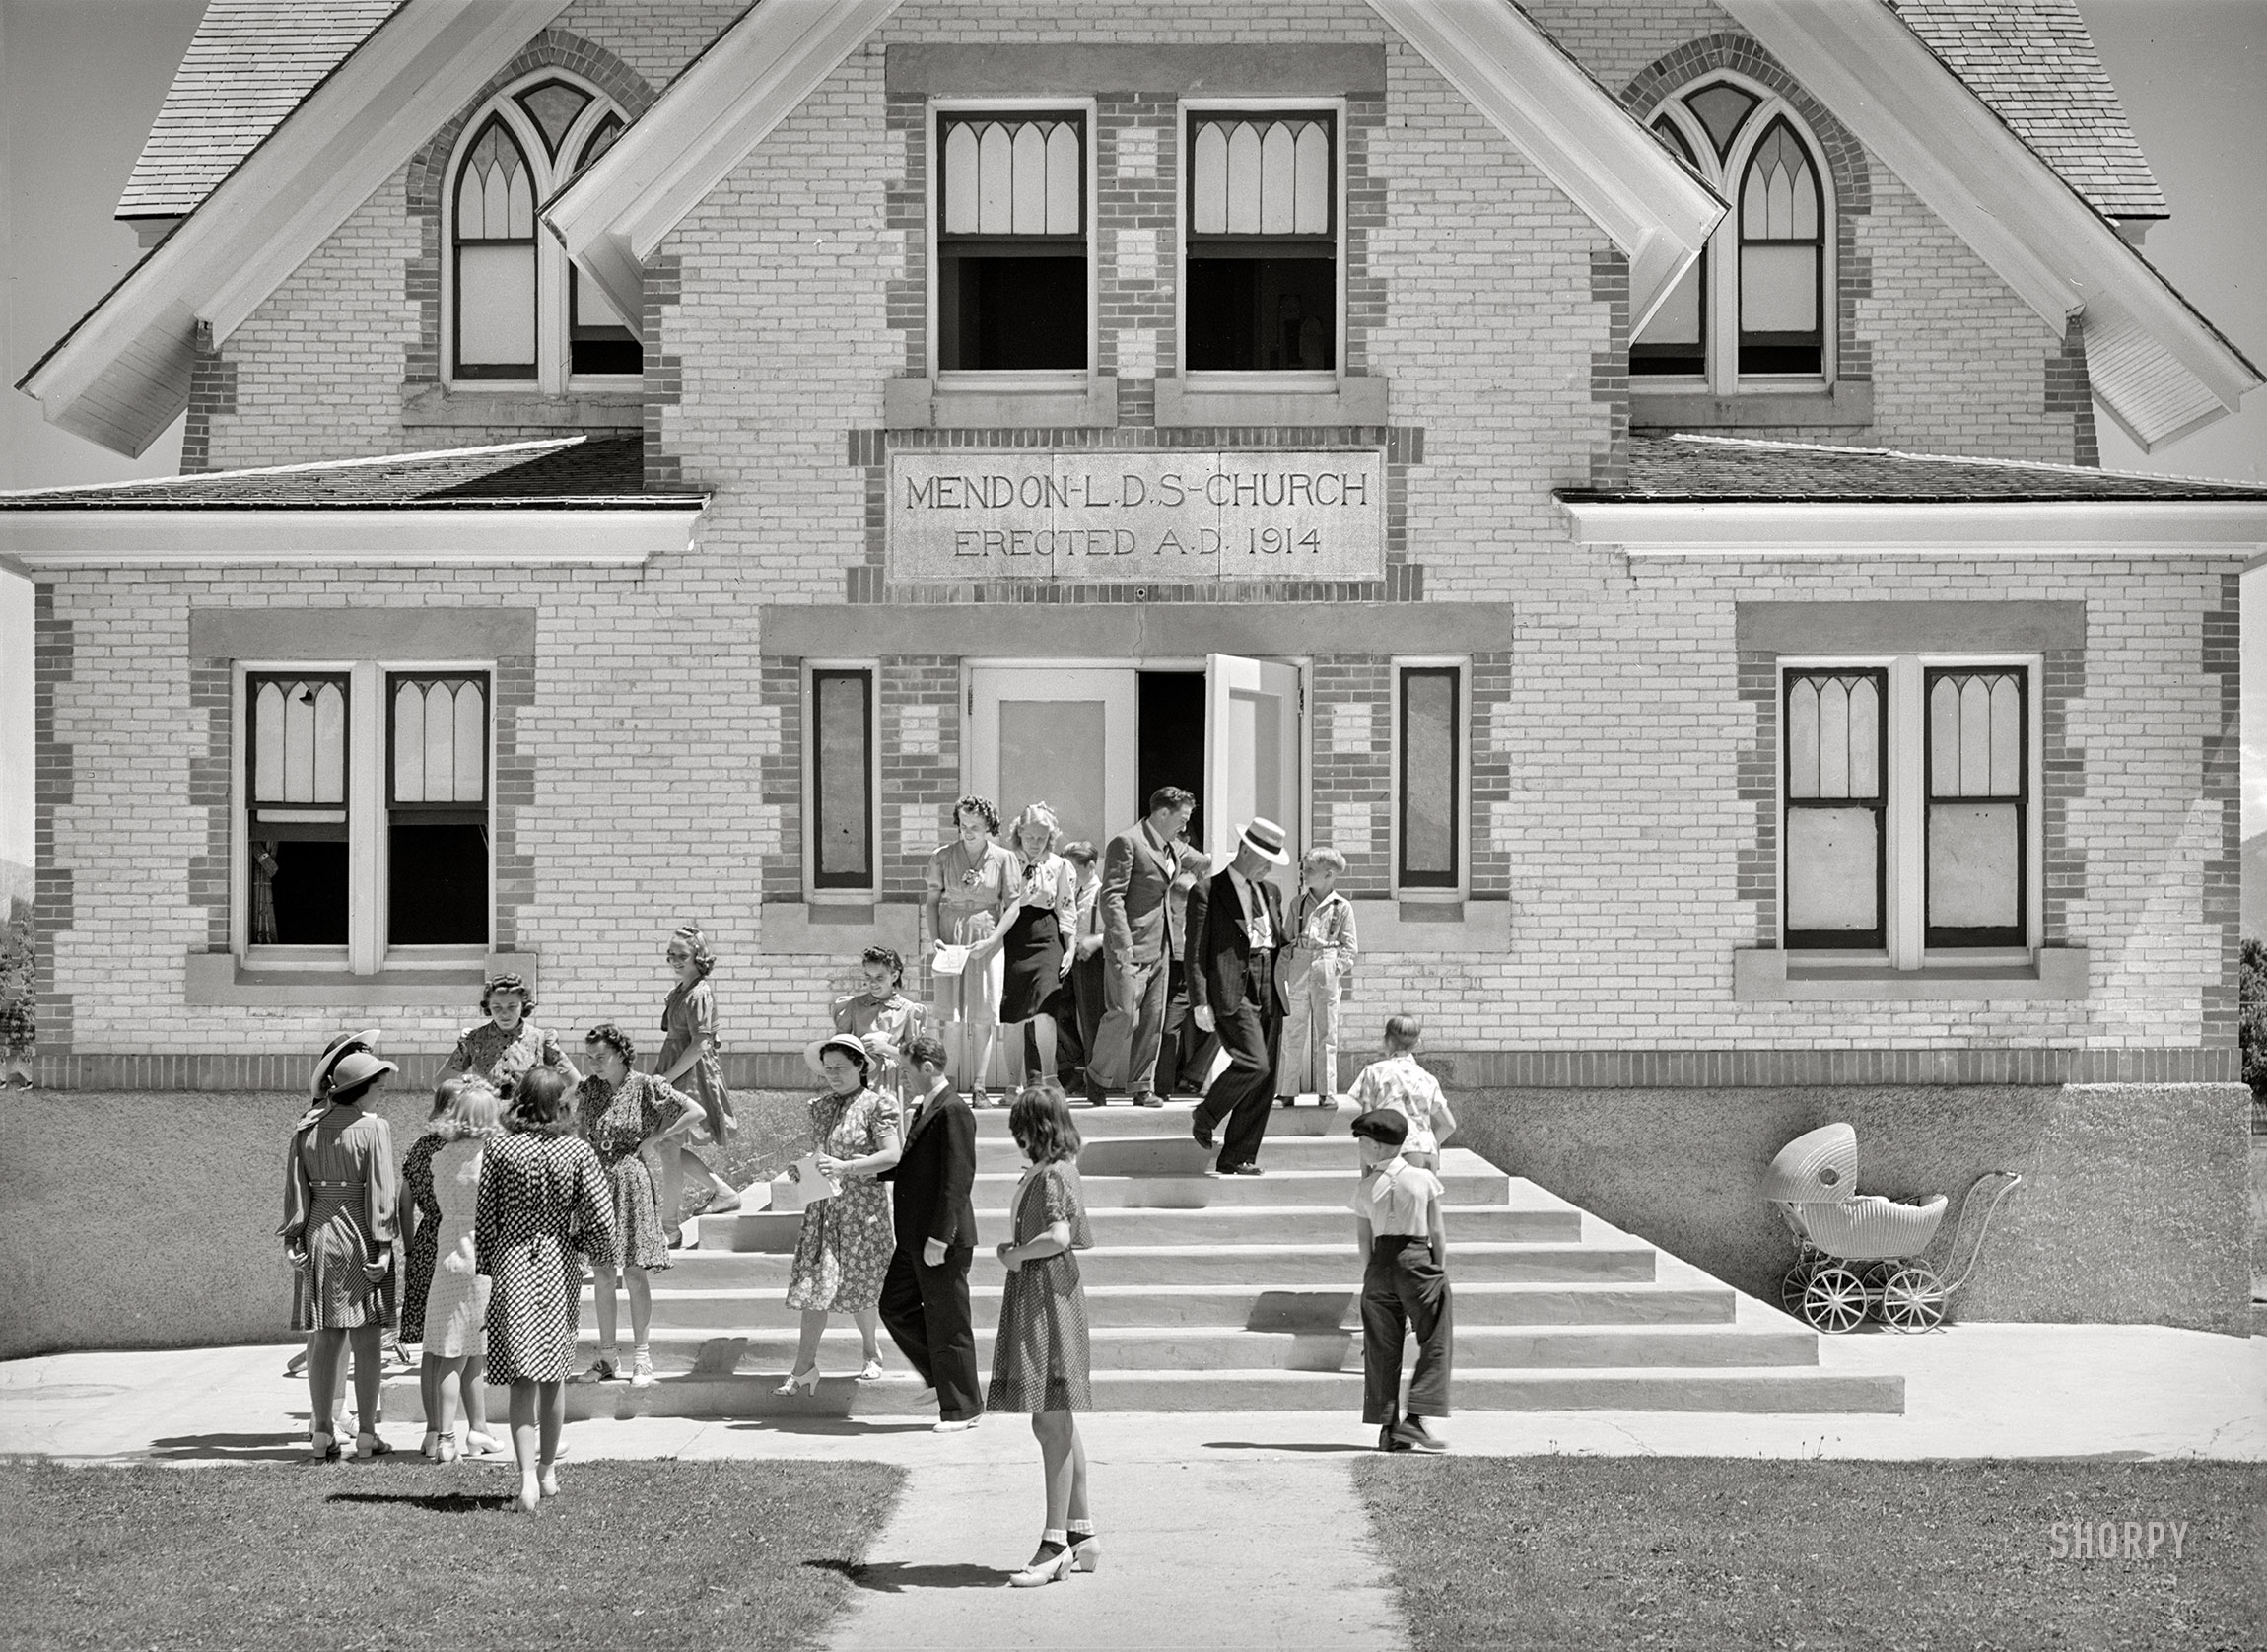 August 1940. "Congregation leaving the Latter Days Saints Church at Mendon, Cache County, Utah." Acetate negative by Russell Lee for the Farm Security Administration. View full size.